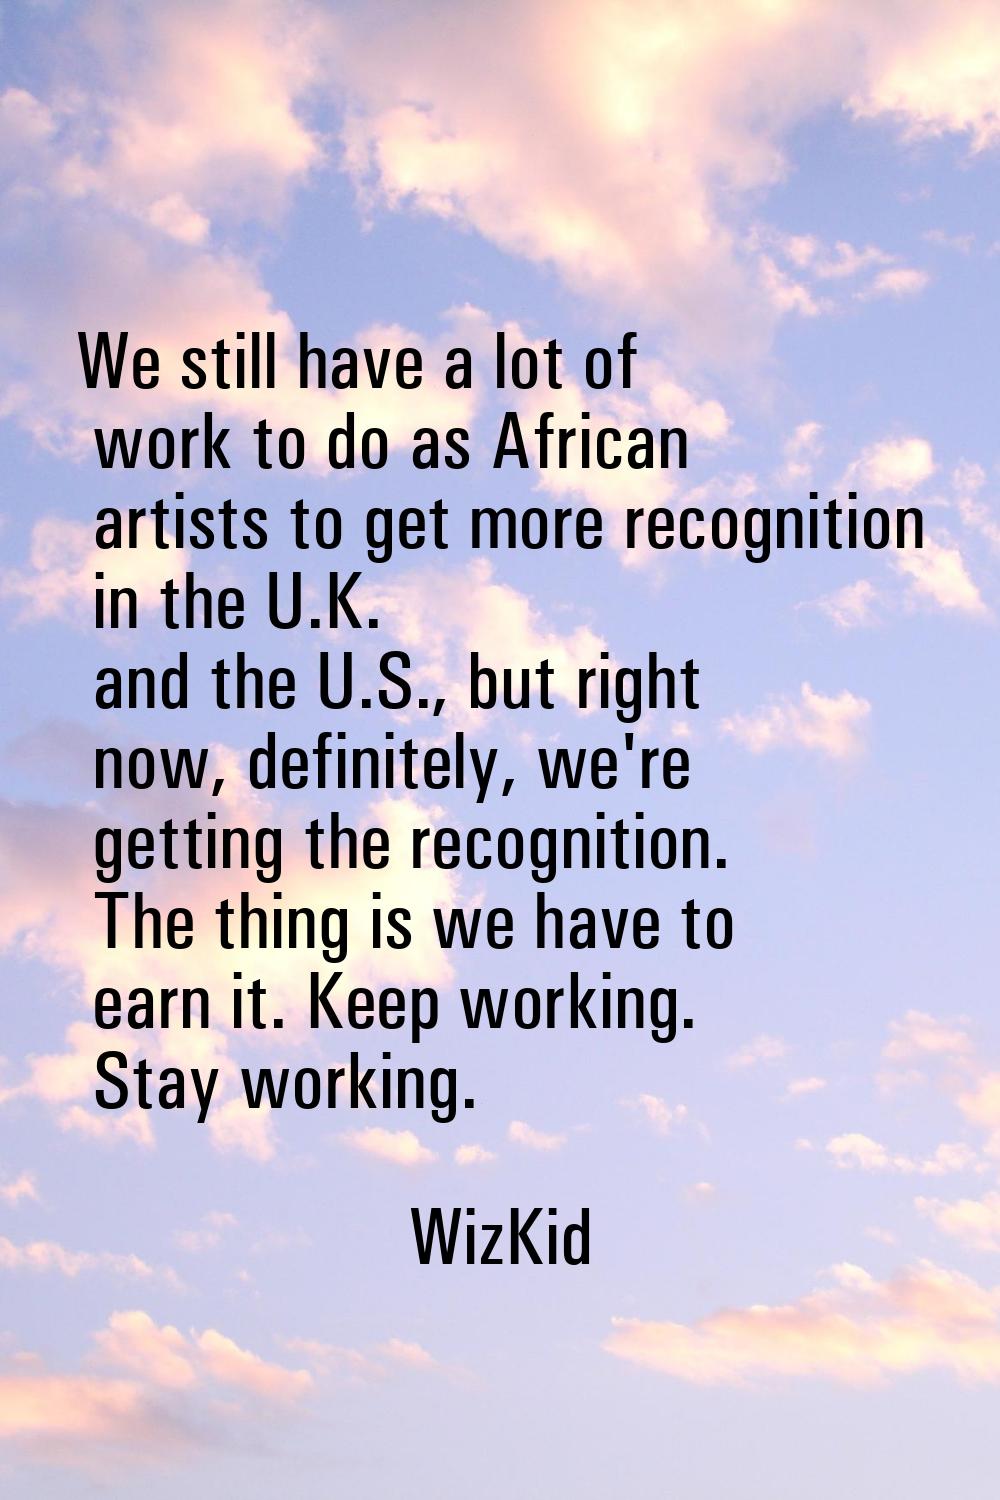 We still have a lot of work to do as African artists to get more recognition in the U.K. and the U.